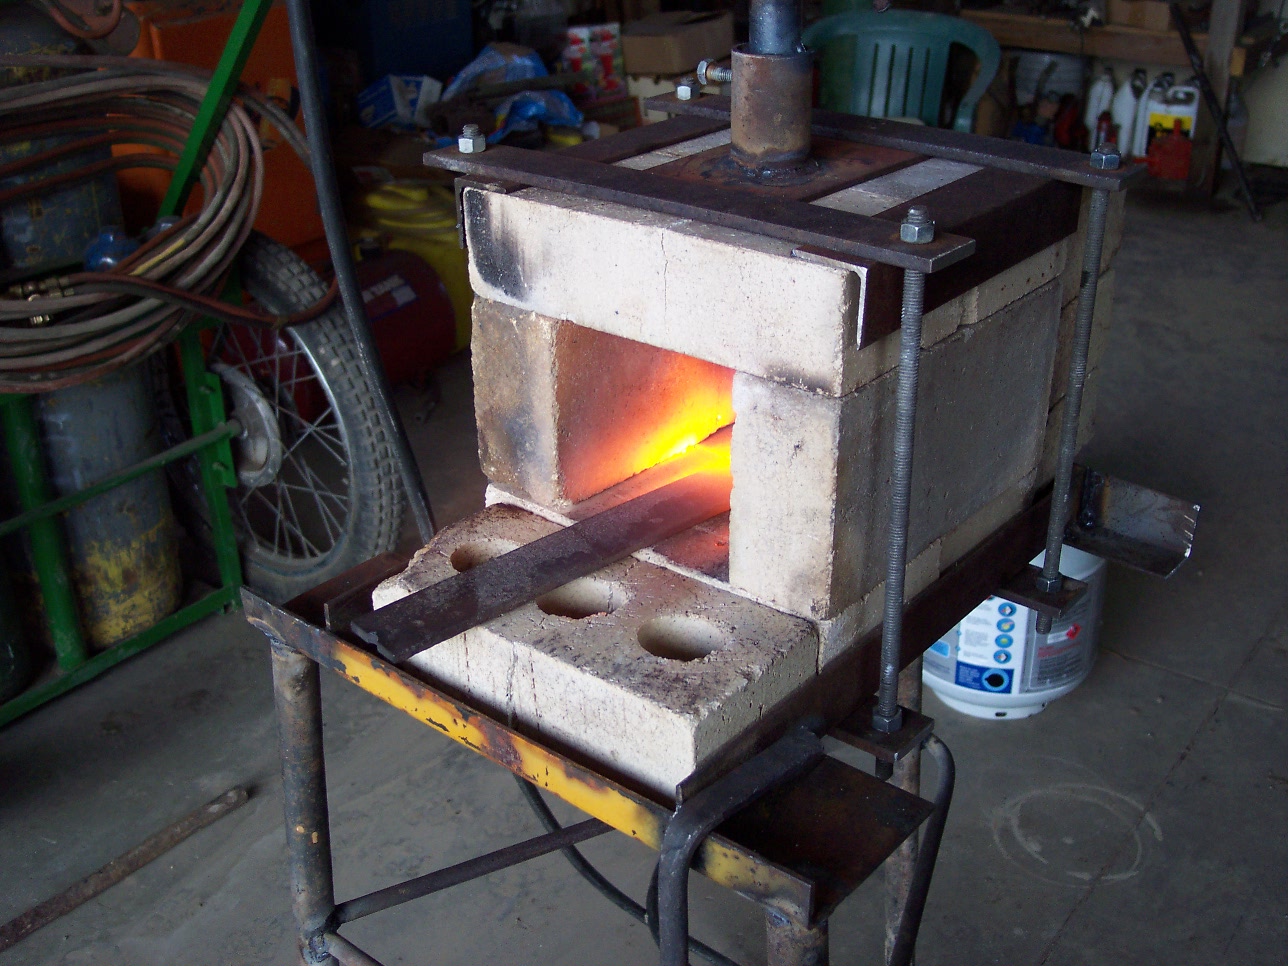 Fire_Brick_Gasser_009 - Members Gallery - I Forge Iron